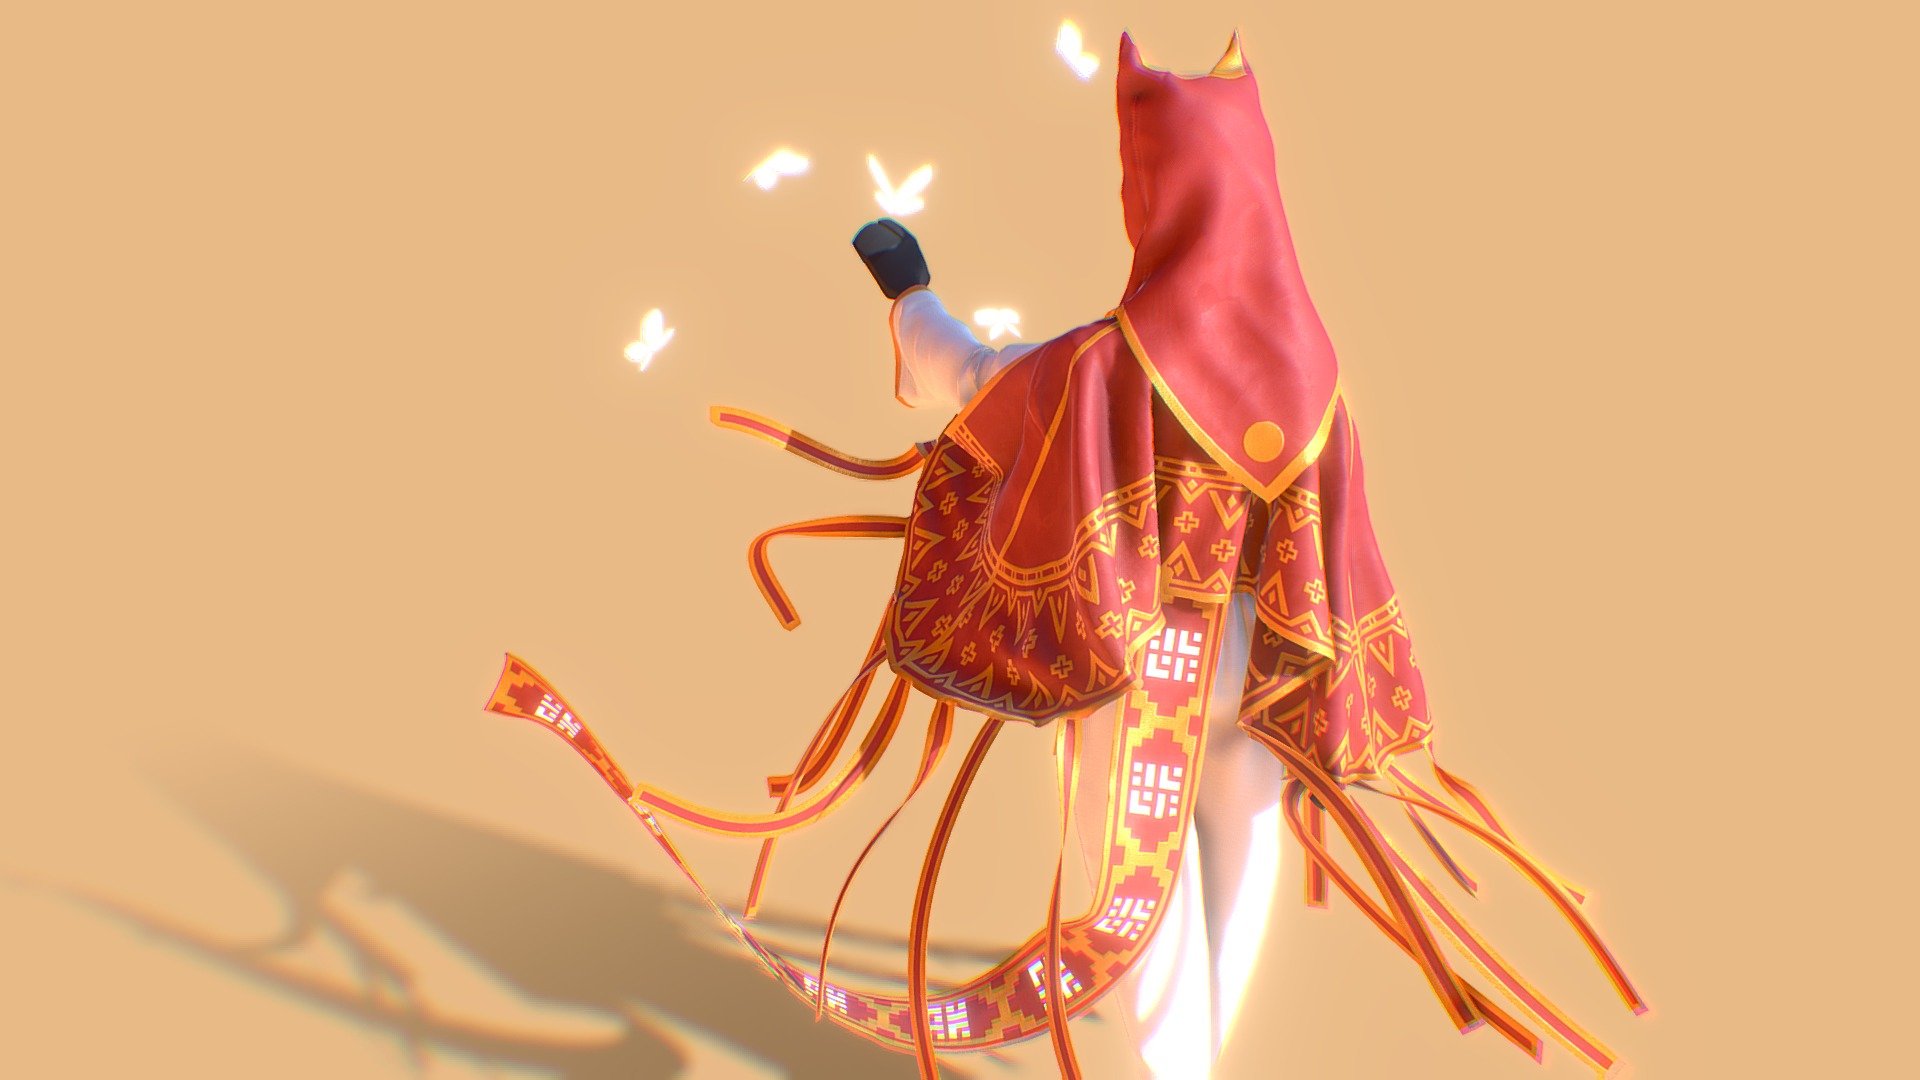 Journey - character clothing concept. PBR, stylized photorealism.
Modeling clothes in Marvelous Designer.
Texturing in Substance Painter.

Journey is an indie adventure game

In Journey, the player controls a robed figure in a vast desert, traveling towards a mountain in the distance. Other players on the same journey can be discovered, and two players can meet and assist each other, but they cannot communicate via speech or text and cannot see each other's names until after the game's credits. The only form of communication between the two is a musical chime, which transforms dull pieces of cloth found throughout the levels into vibrant red, affecting the game world and allowing the player to progress through the levels. The developers sought to evoke in the player a sense of smallness and wonder and to forge an emotional connection between them and the anonymous players they meet along the way 3d model